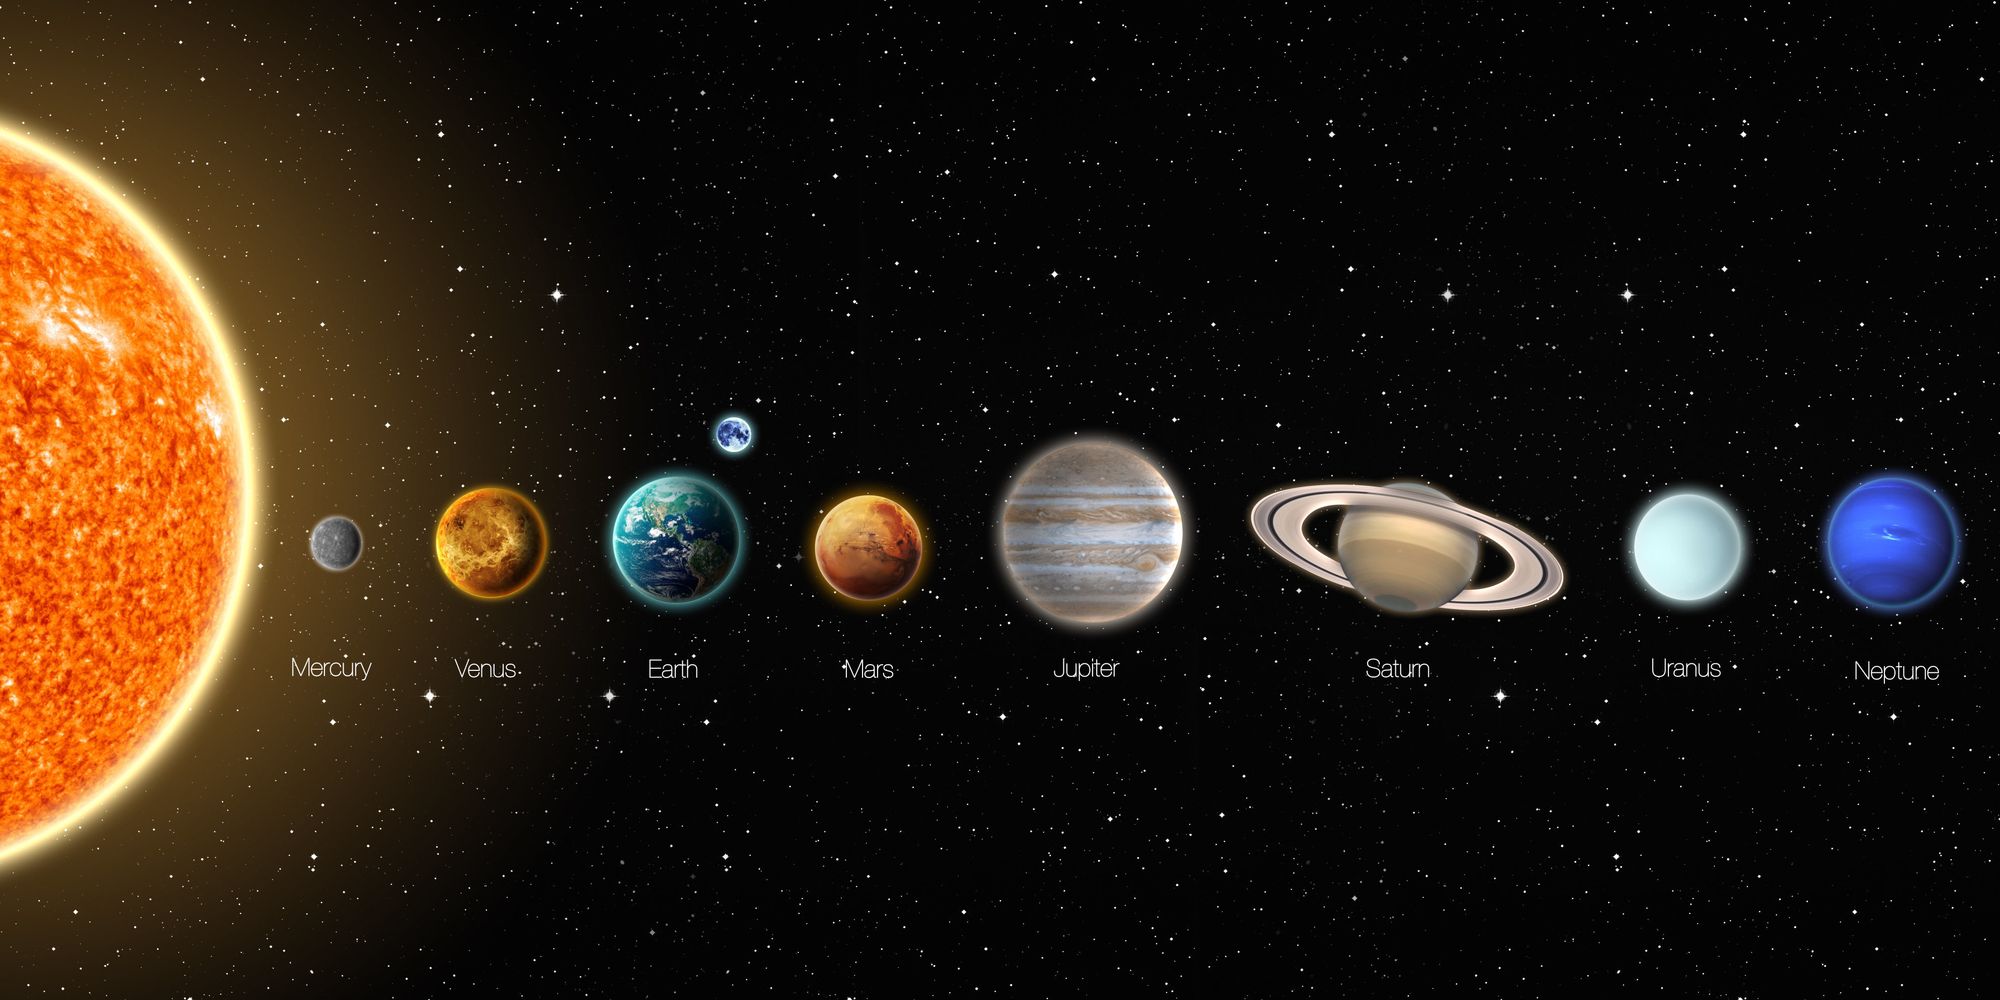 What Are Some Facts About The Planets In The Solar System